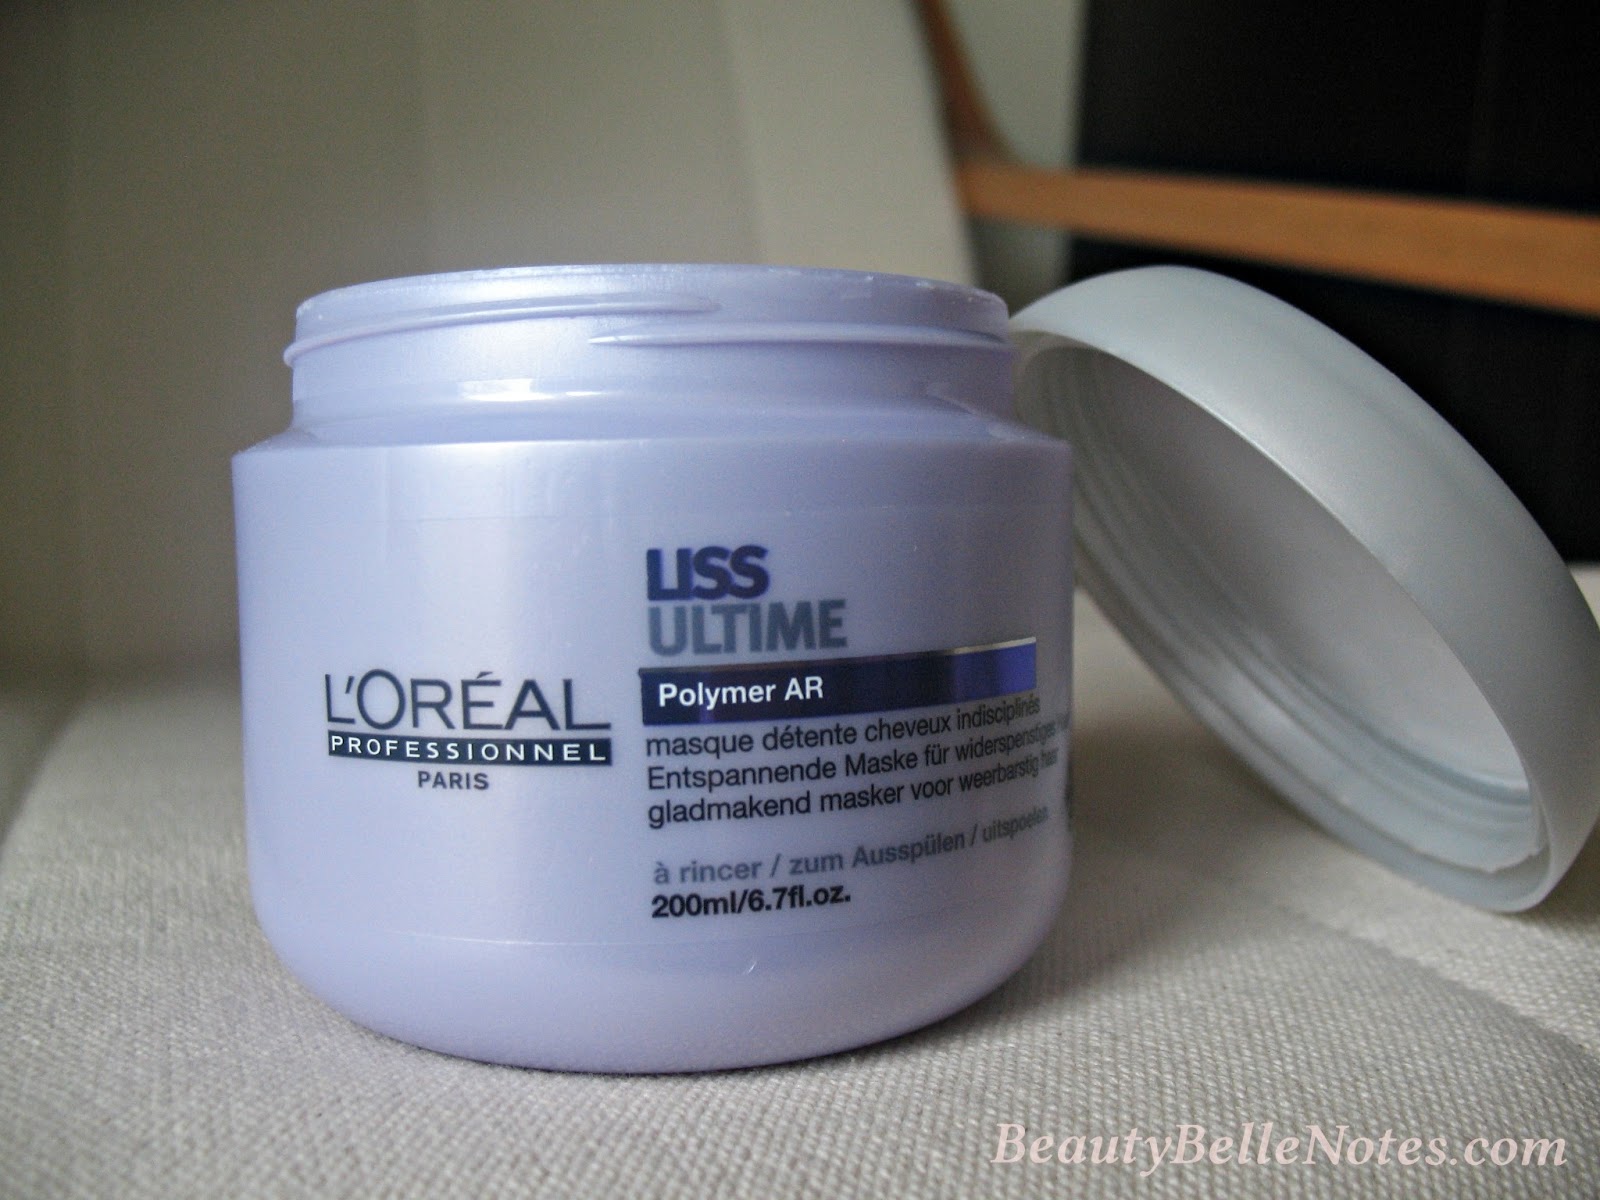 L'Oreal-Liss-Ultime-Polymer-AR-Masque-review-photos-01